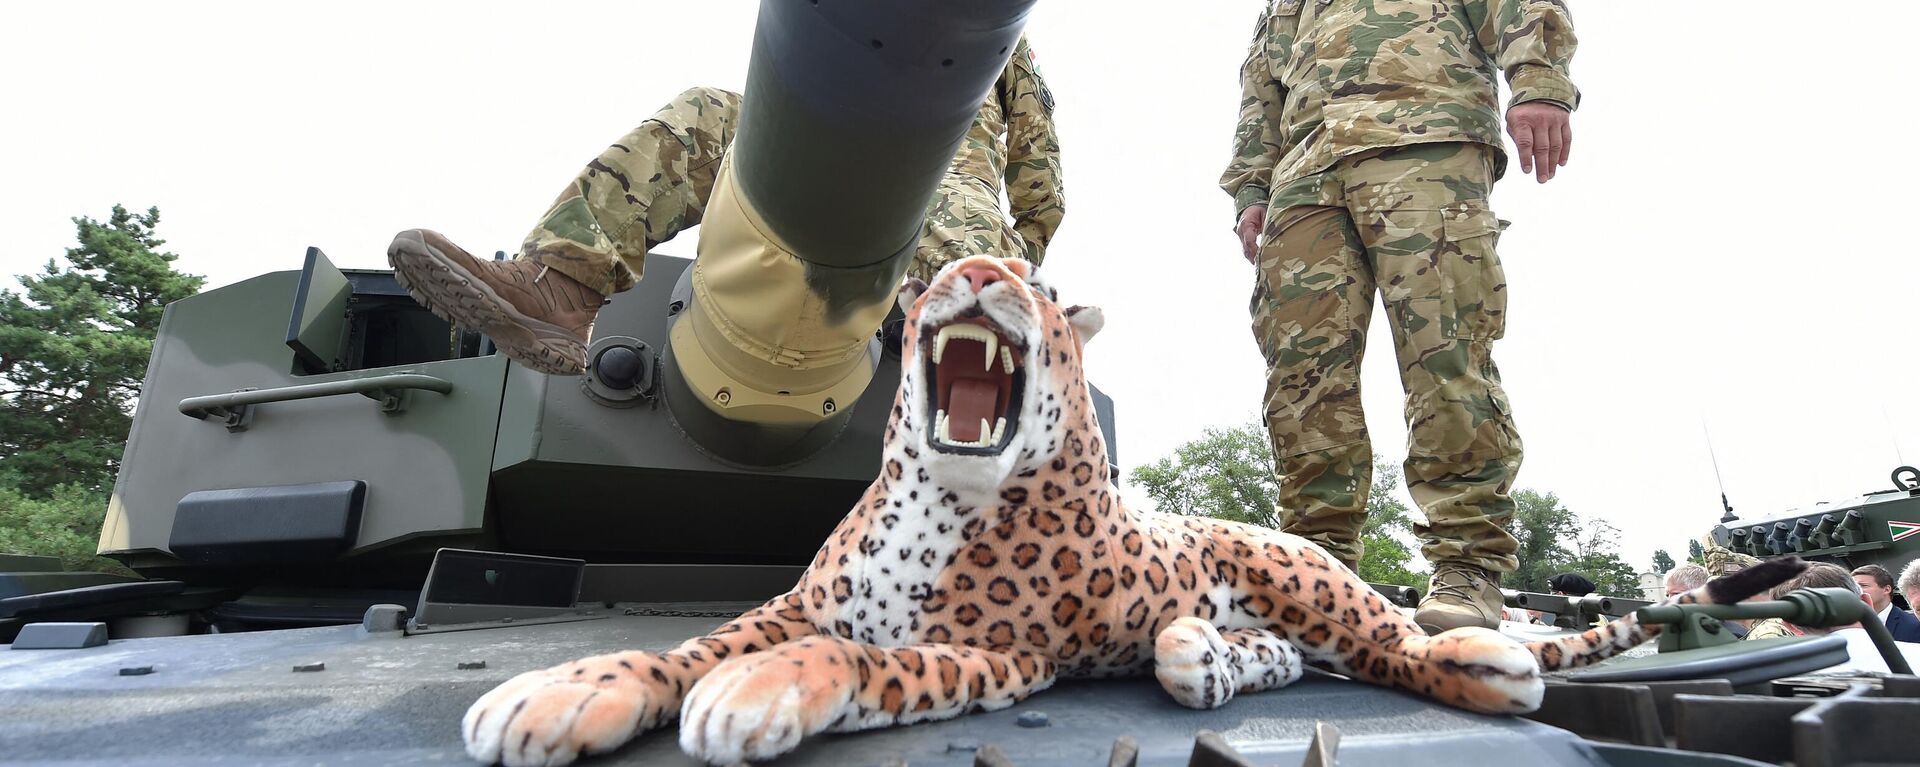 A stuffed toy leopard is placed on a Leopard 2/A4 battle tank during a handover ceremony of tanks at the army base of Tata, Hungary, on July 24, 2020. Hungary is one of over a dozen countries operating the German-made tank. - Sputnik International, 1920, 23.01.2023